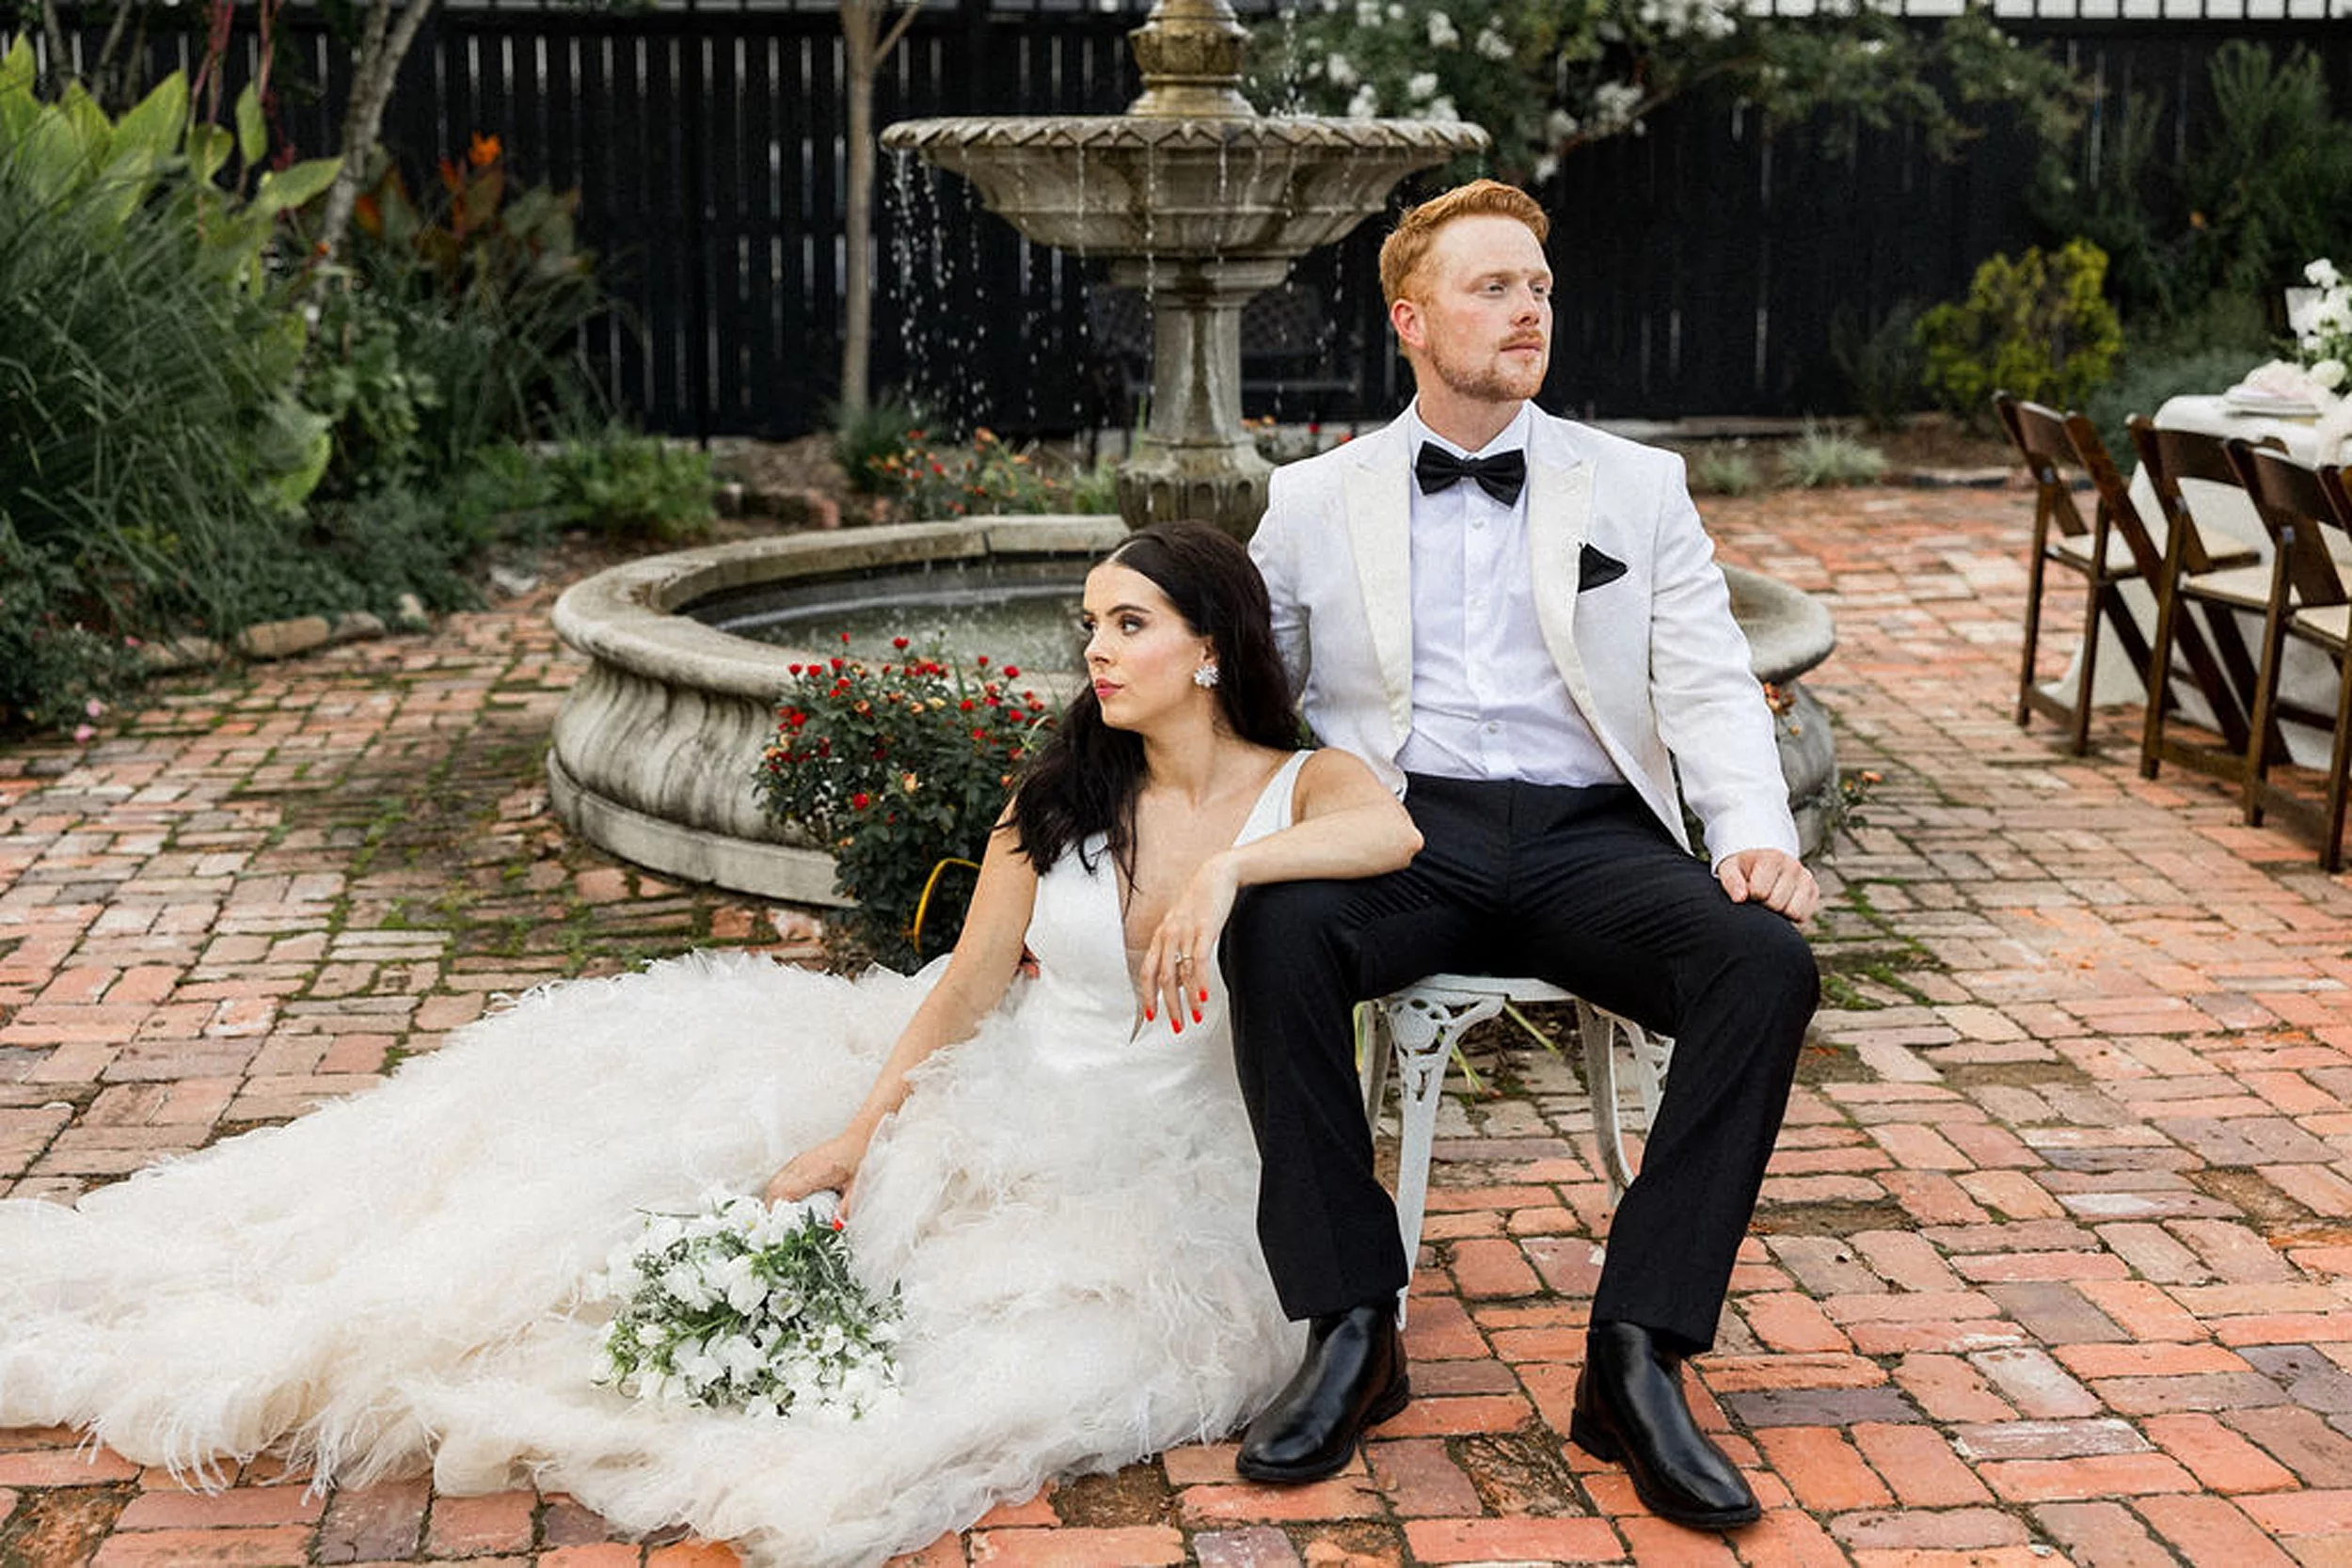 Newlyweds sit in a chair and on the brick pavers by the fountain in a garden